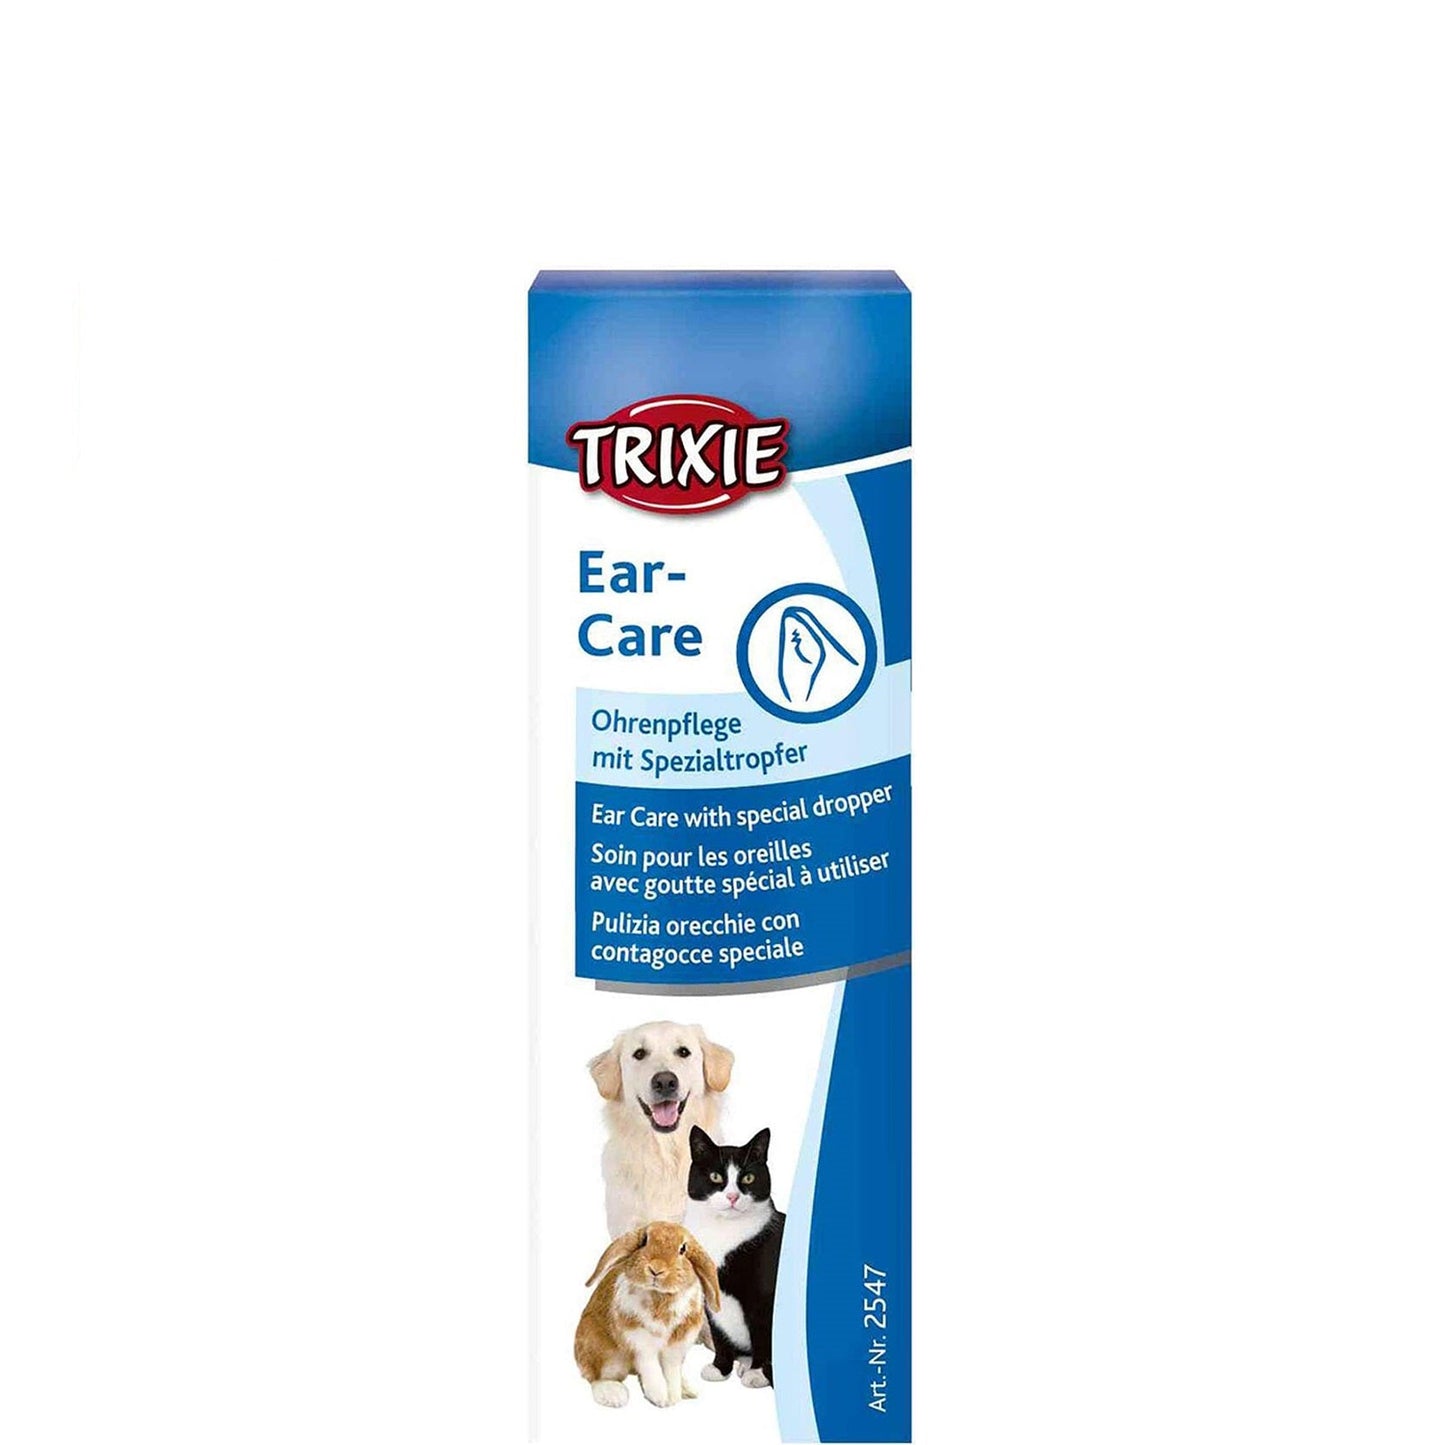 Trixie - Ear Care For Dogs & Cats